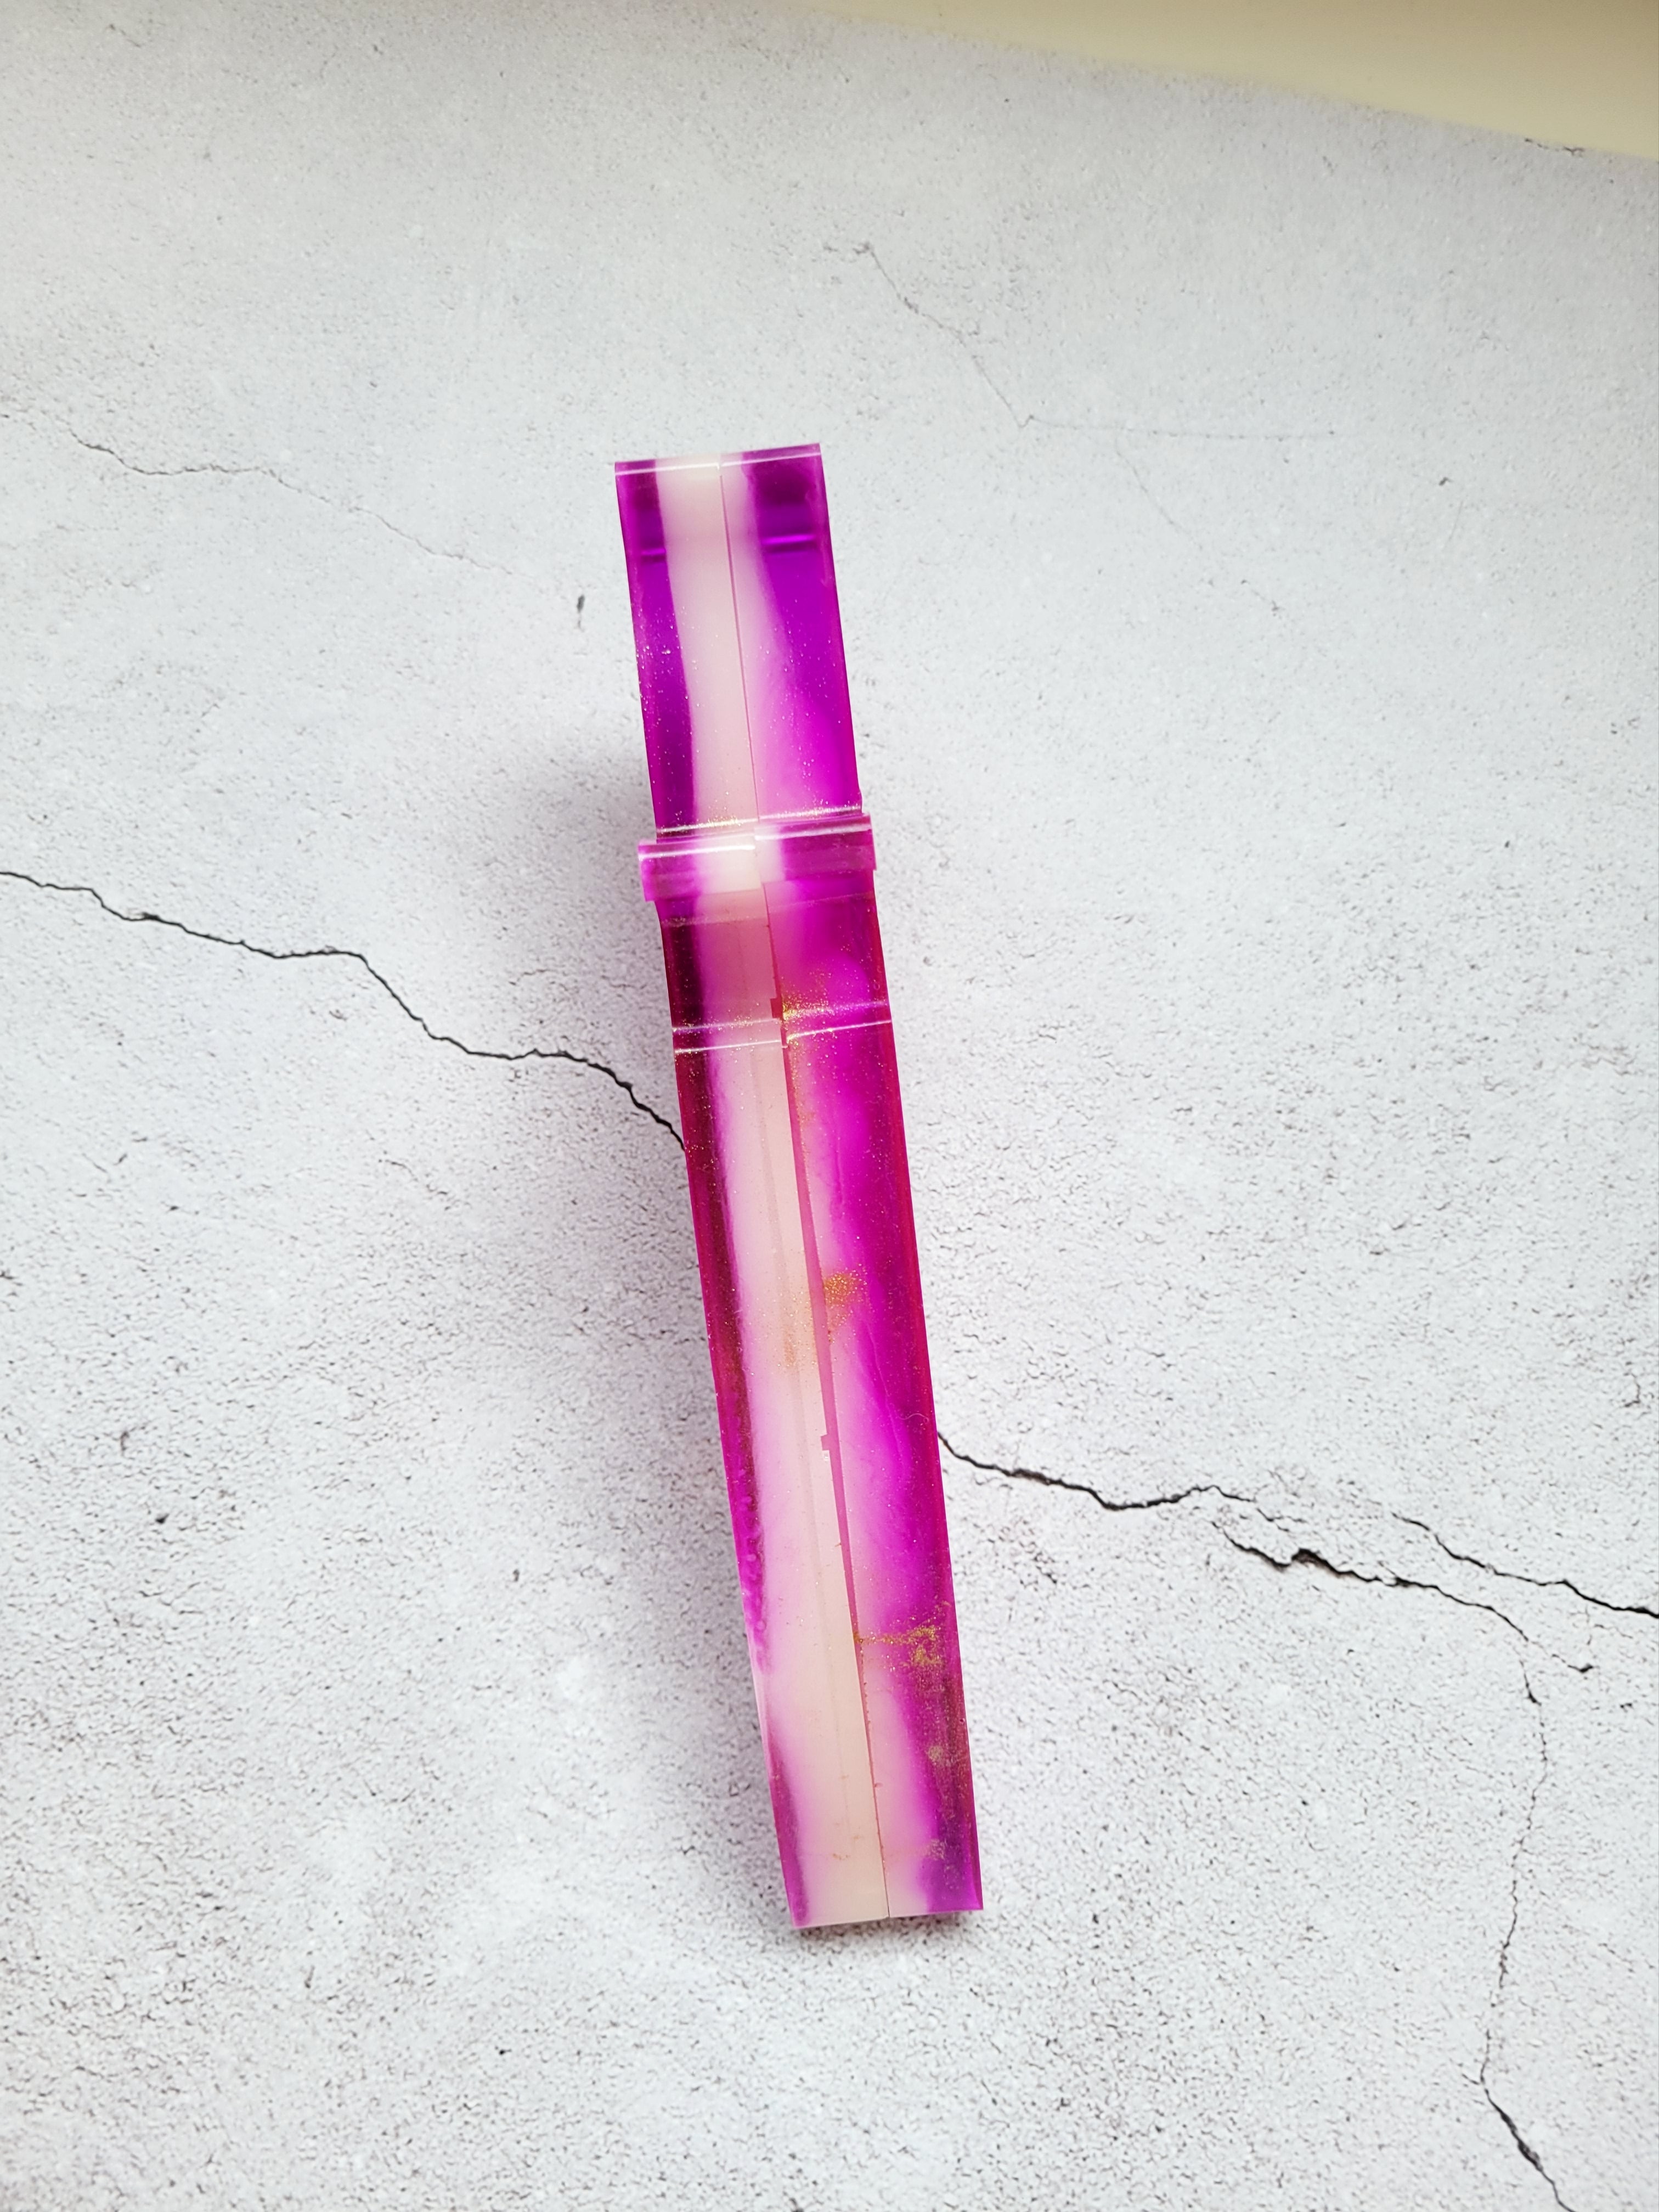 resin dice dagger, closed. It's outside is bright pink, the inside is white with gold spray. Top side view